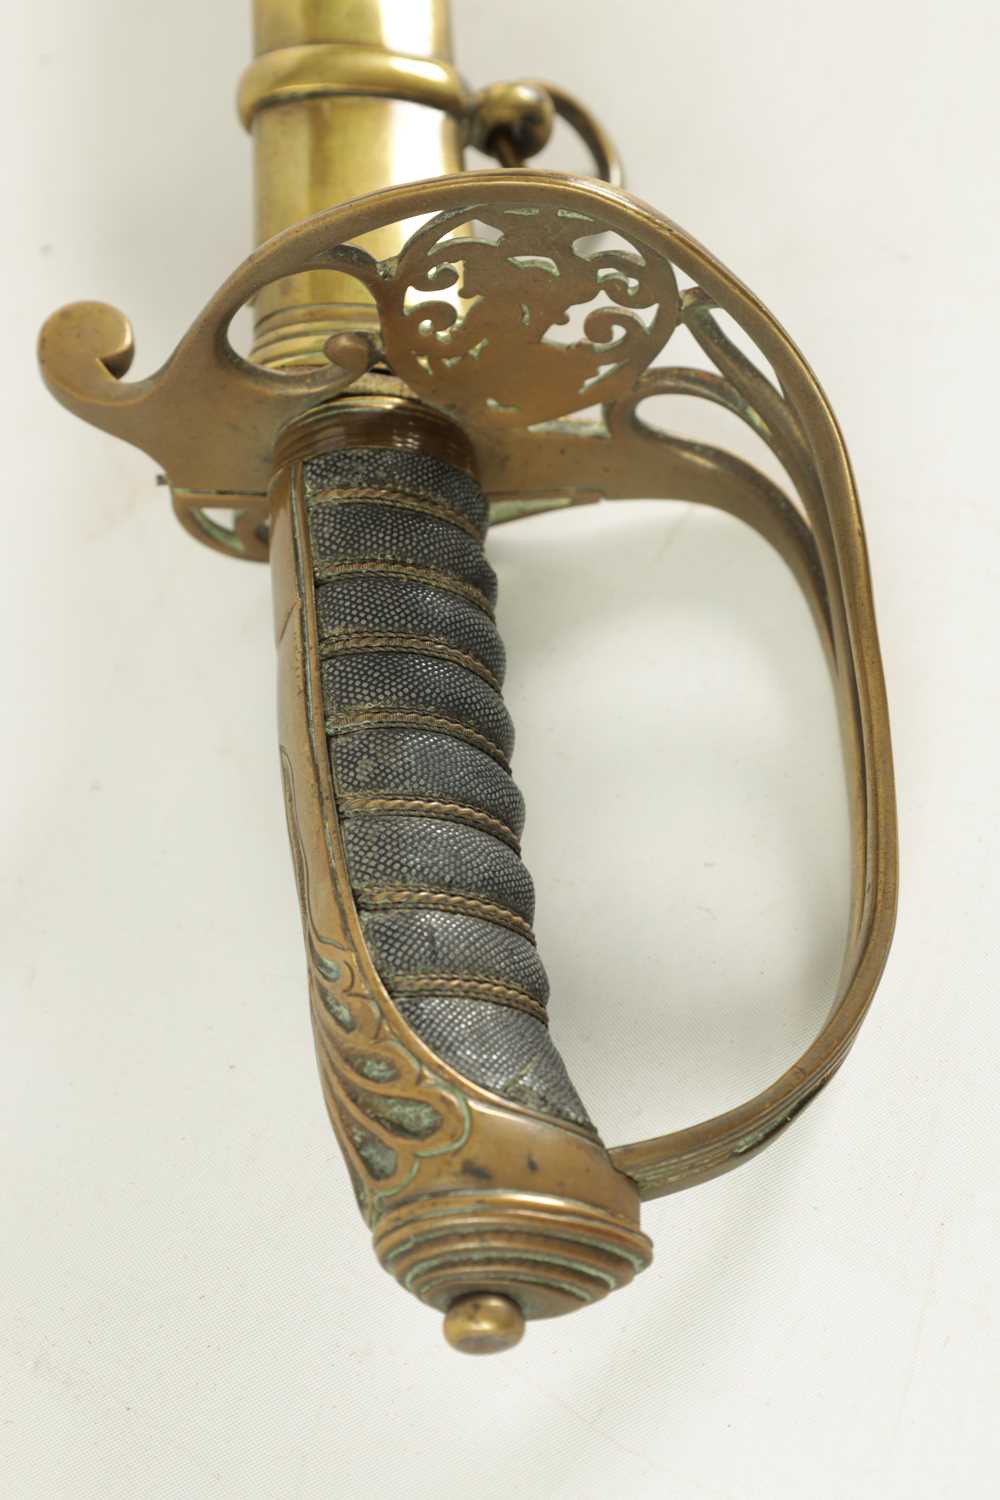 A VICTORIAN 1822 PATTERN INFANTRY OFFICER'S SWORD - Image 4 of 12